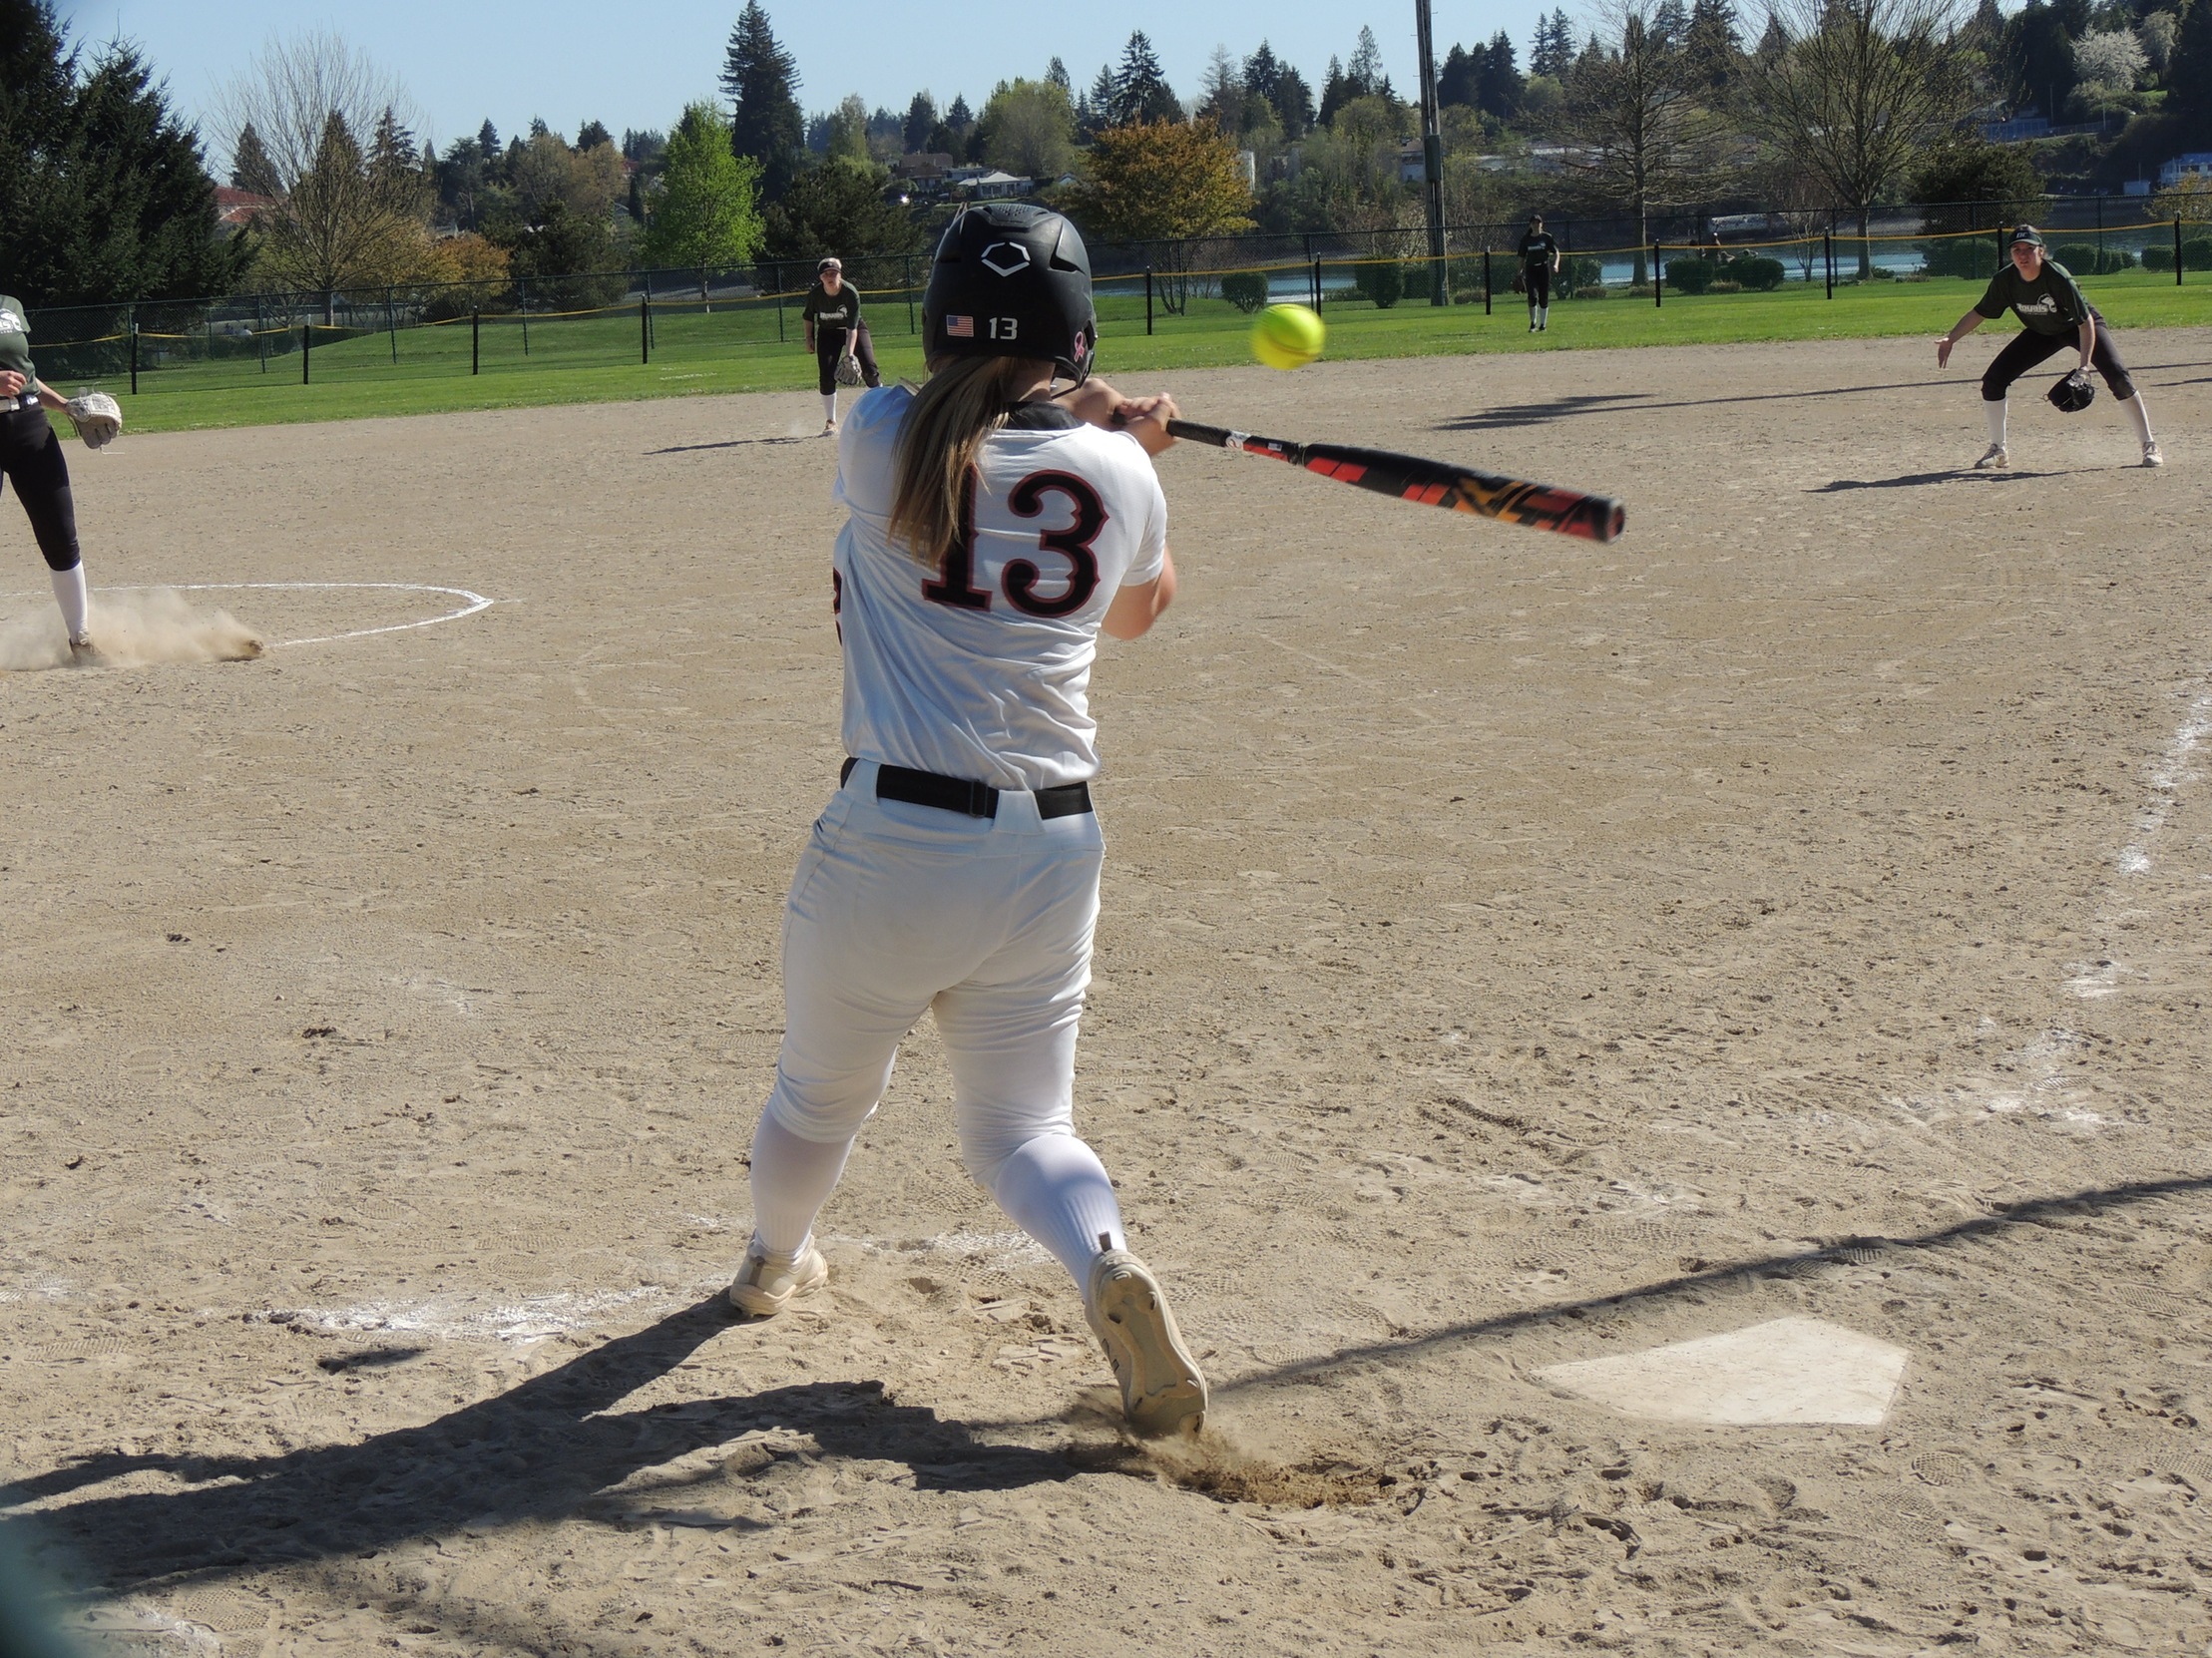 Amy Taylor hitting during a game.